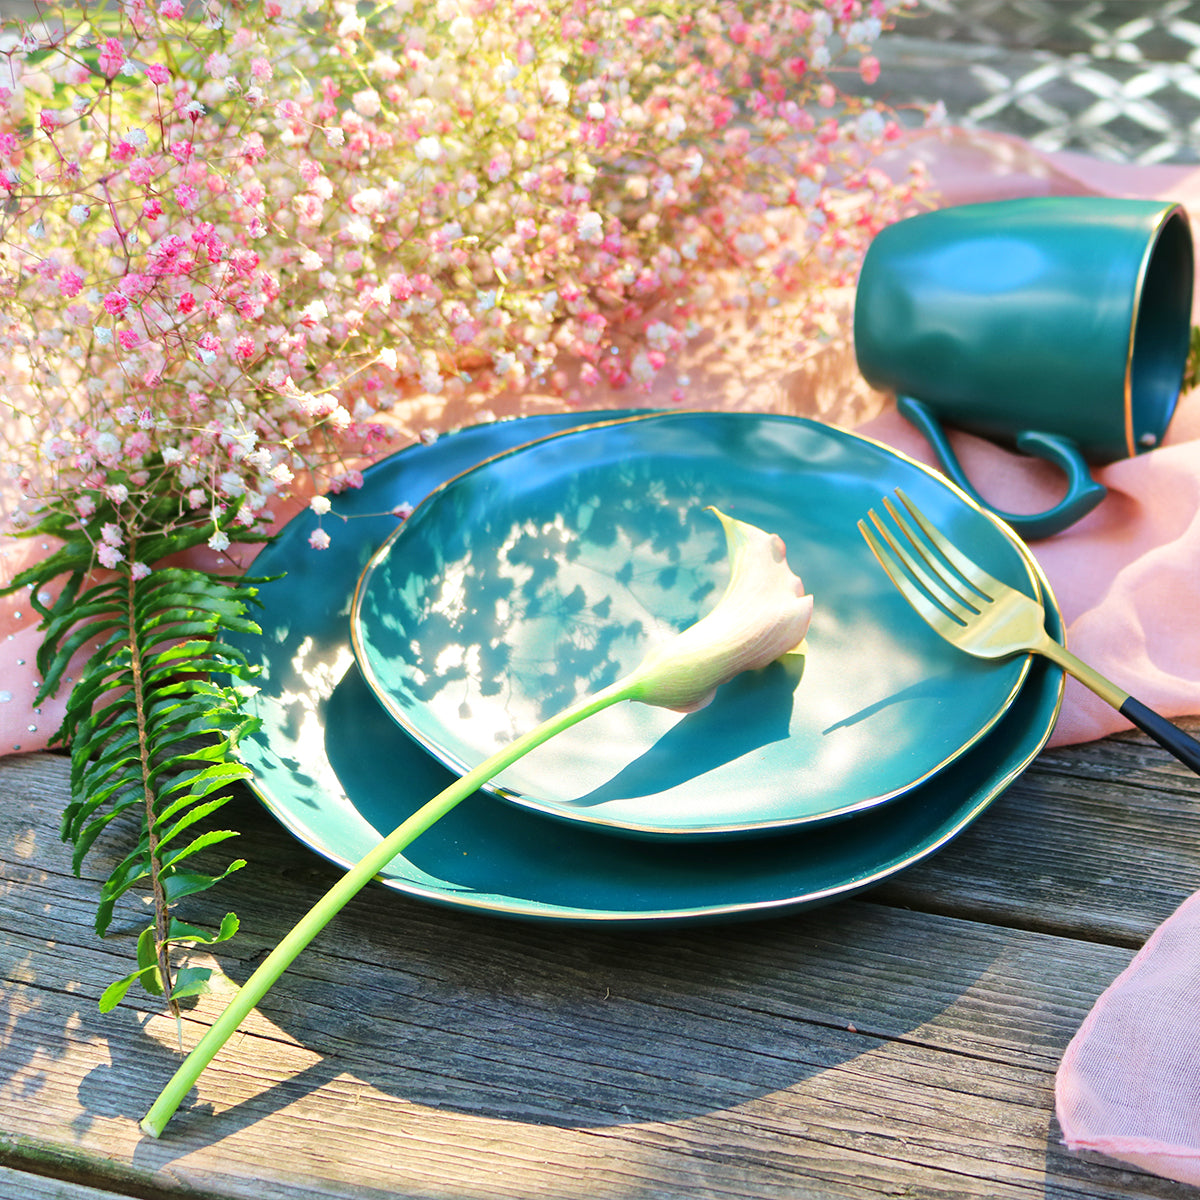 Add a Spring-Inspired Touch to Your Table